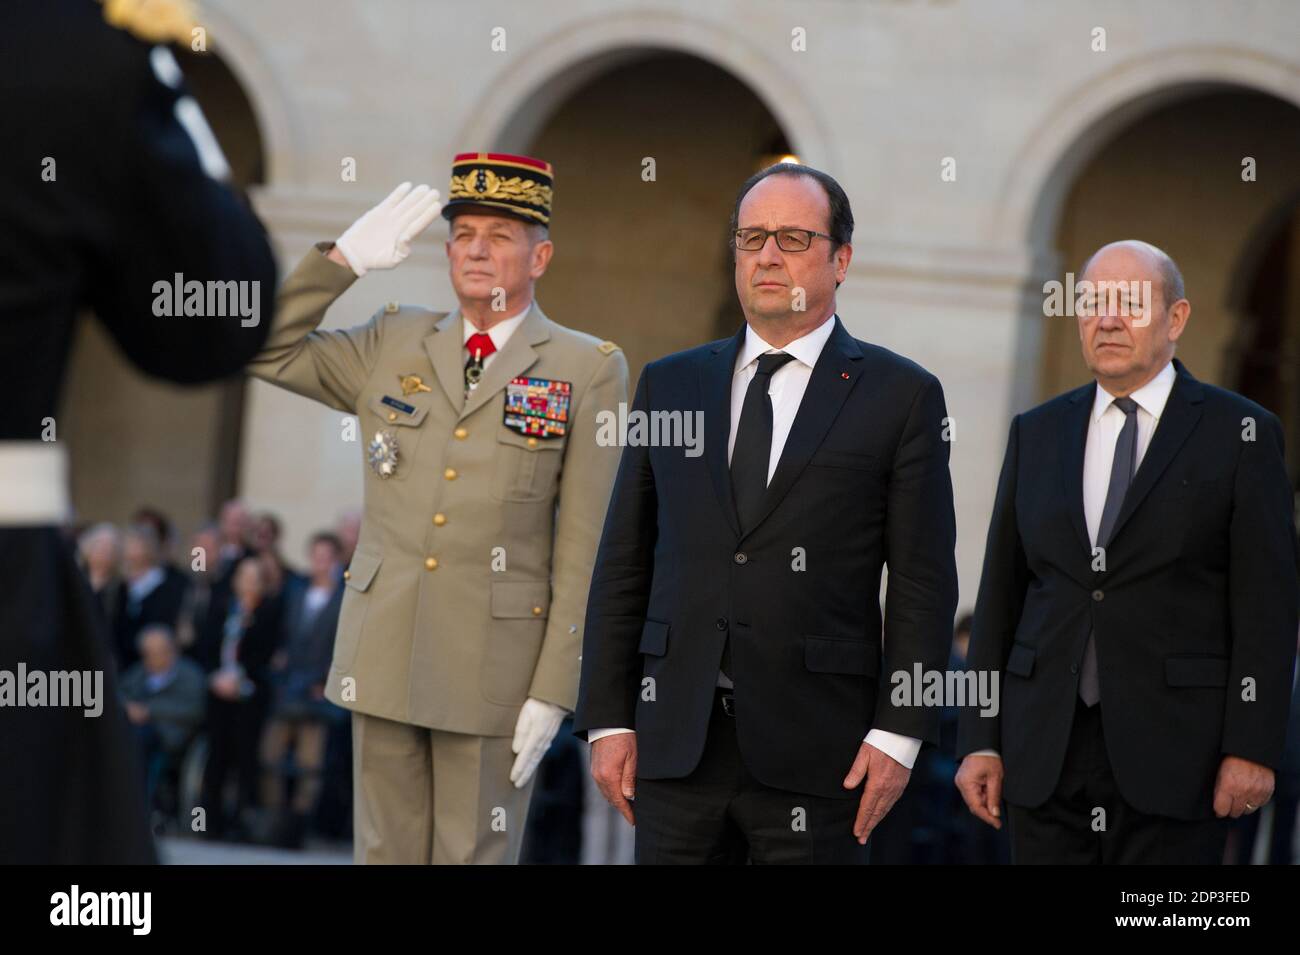 French president Francois Hollande and Defence minister Jean-Yves Le Drian attend a state funeral ceremony for late French World War II hero Jean-Louis Cremieux-Brilhac at the Hotel des Invalides in Paris, France on April 15, 2015. A towering figure in the French Resistance, Cremieux-Brilhac, one of the first to condemn the Nazi gas chambers, died on April 8, 2015 aged 98. Photo by Thierry Orban/ABACAPRESS.COM Stock Photo